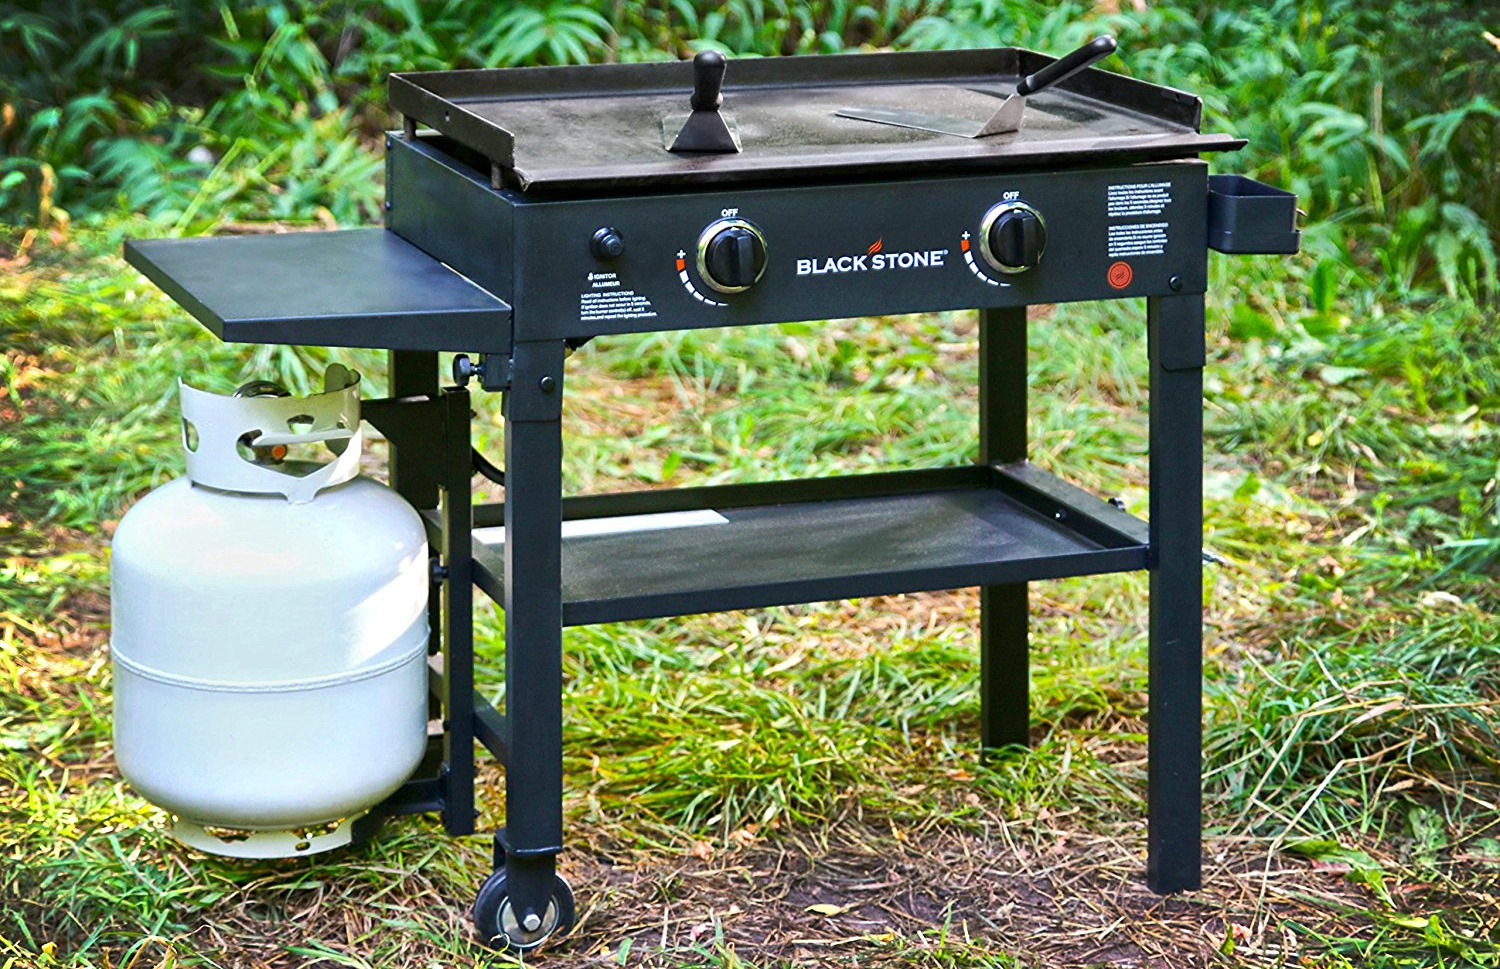 https://hip2save.com/wp-content/uploads/2018/04/blackstone-28inch-outdoor-2-burner-propane-gas-grill-with-griddle-top-2.jpg?resize=1500%2C969&strip=all